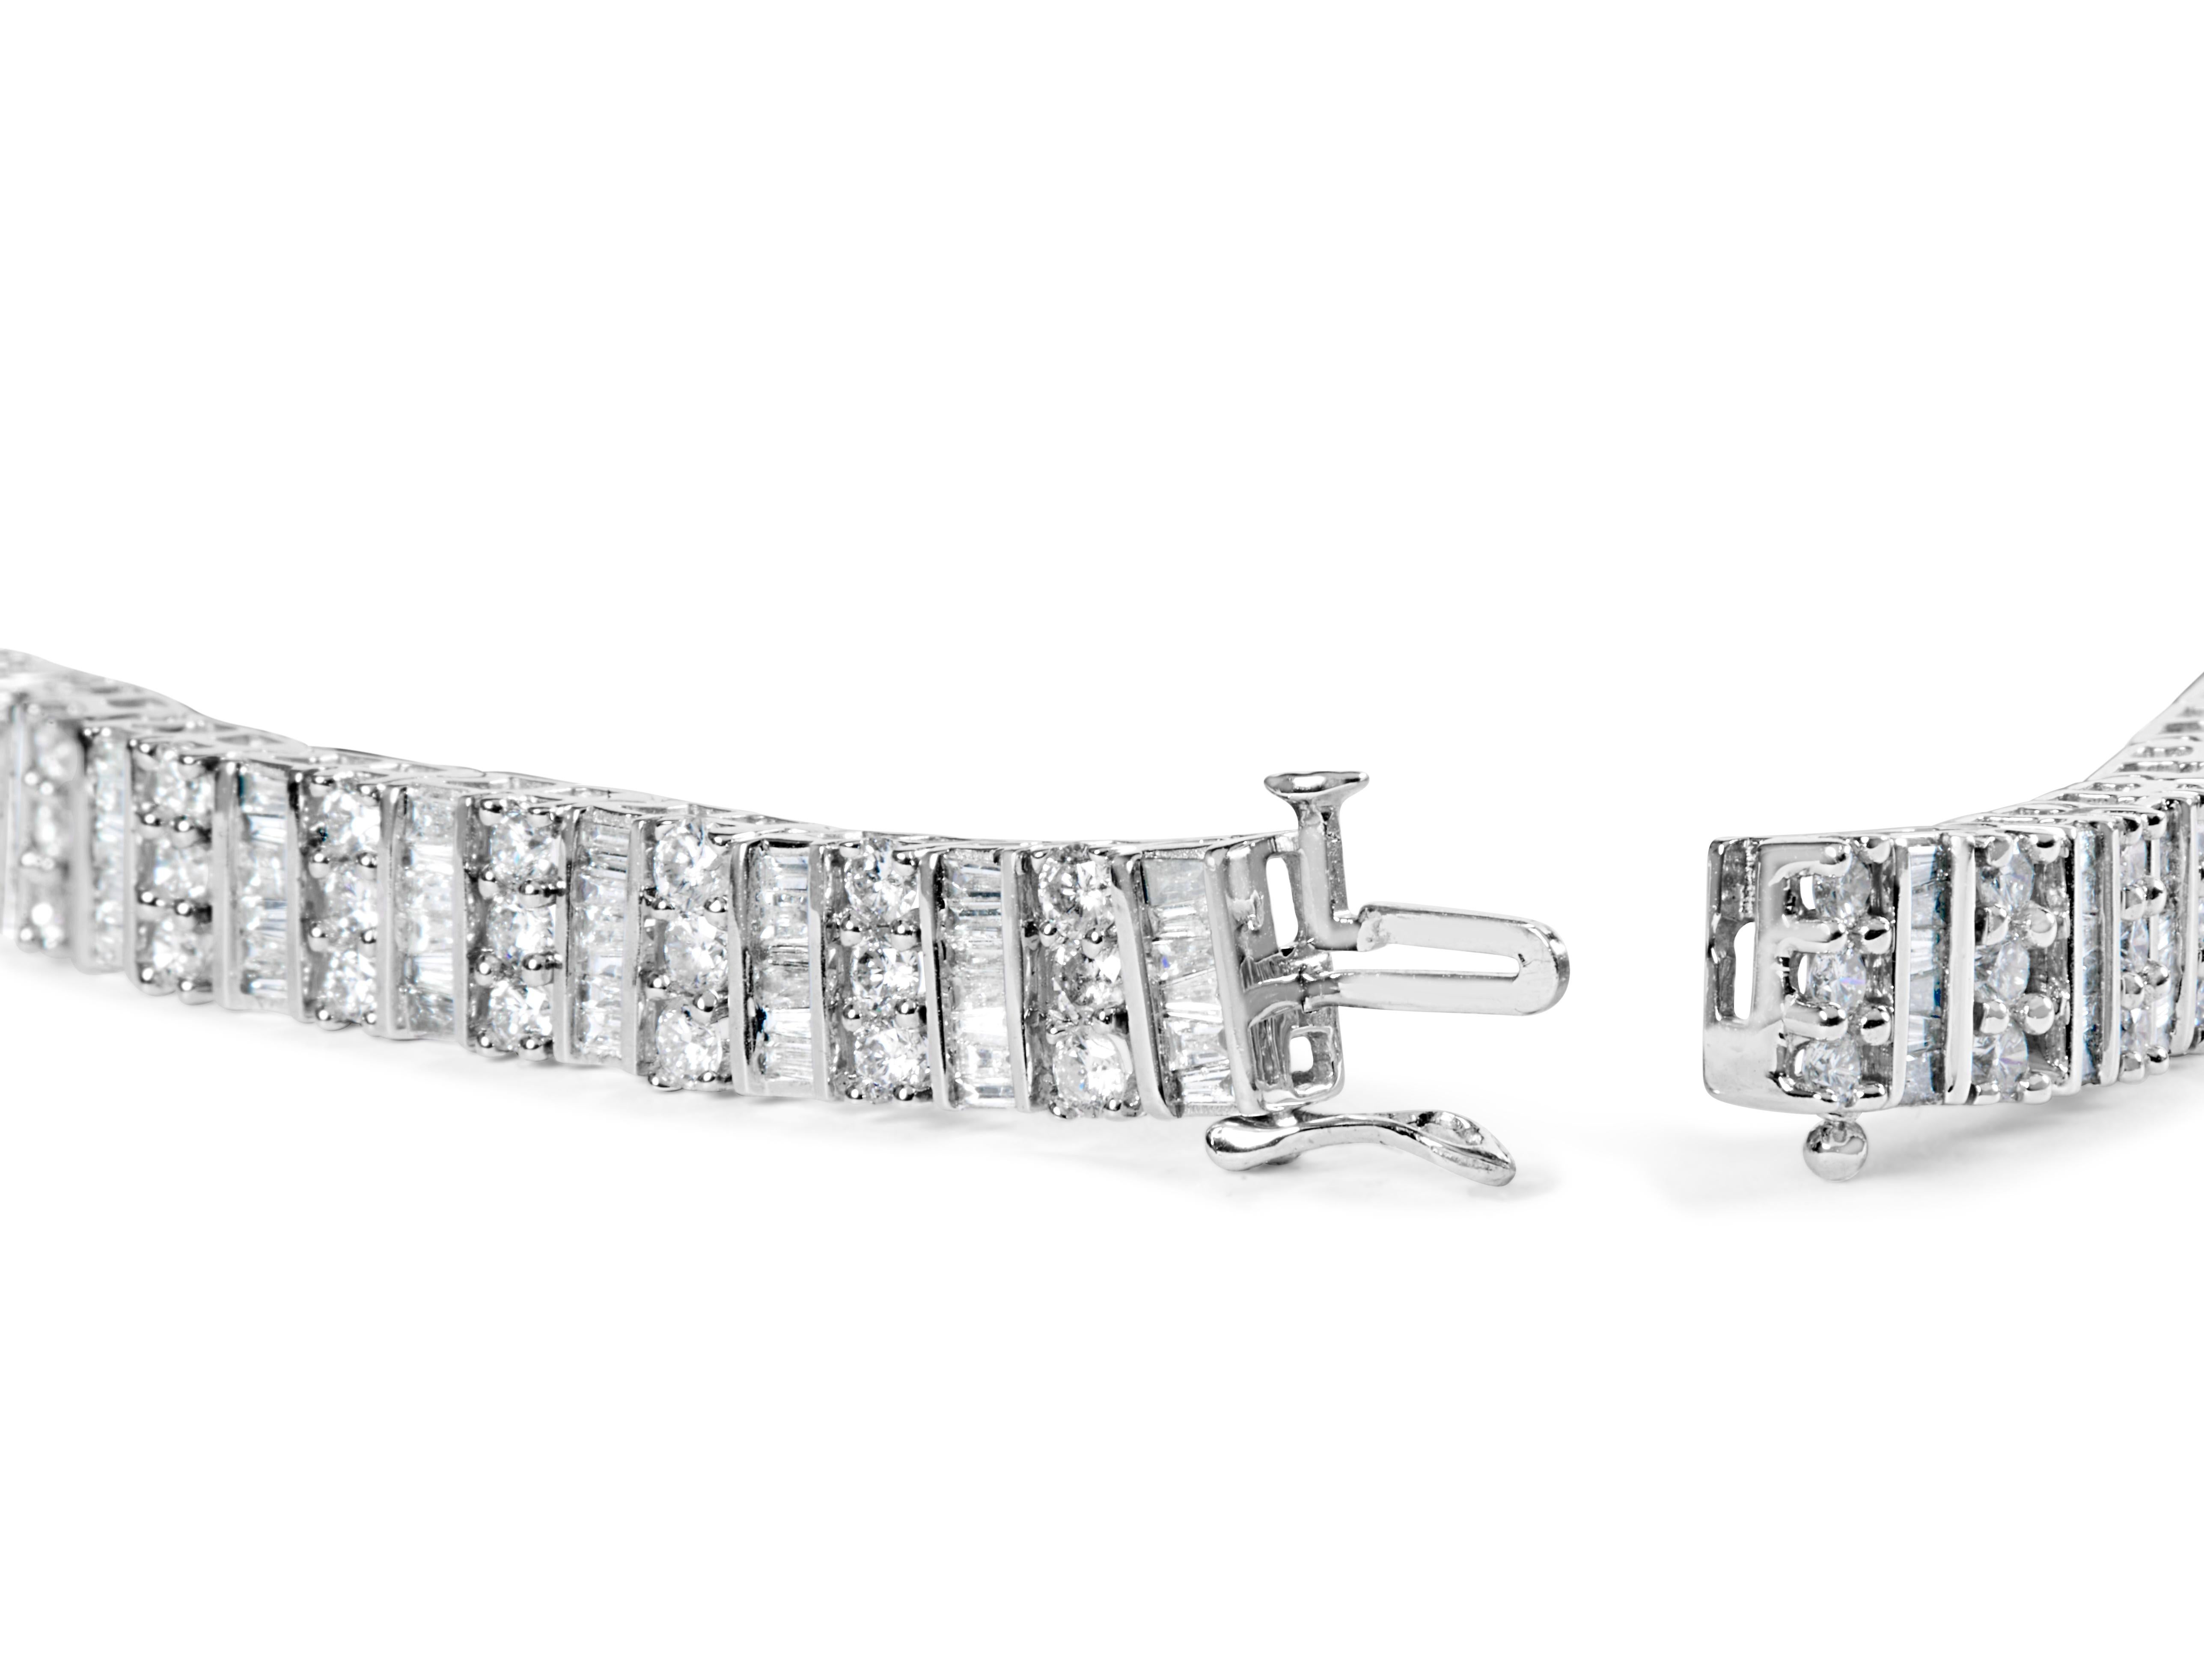 Envelop your wrist in the sheer elegance of this 14K White Gold Diamond Tennis Bracelet, where luxury seamlessly intertwines with geometric harmony. In a dance of light and precision, alternating baguette and round diamonds cascade in a rhythmic